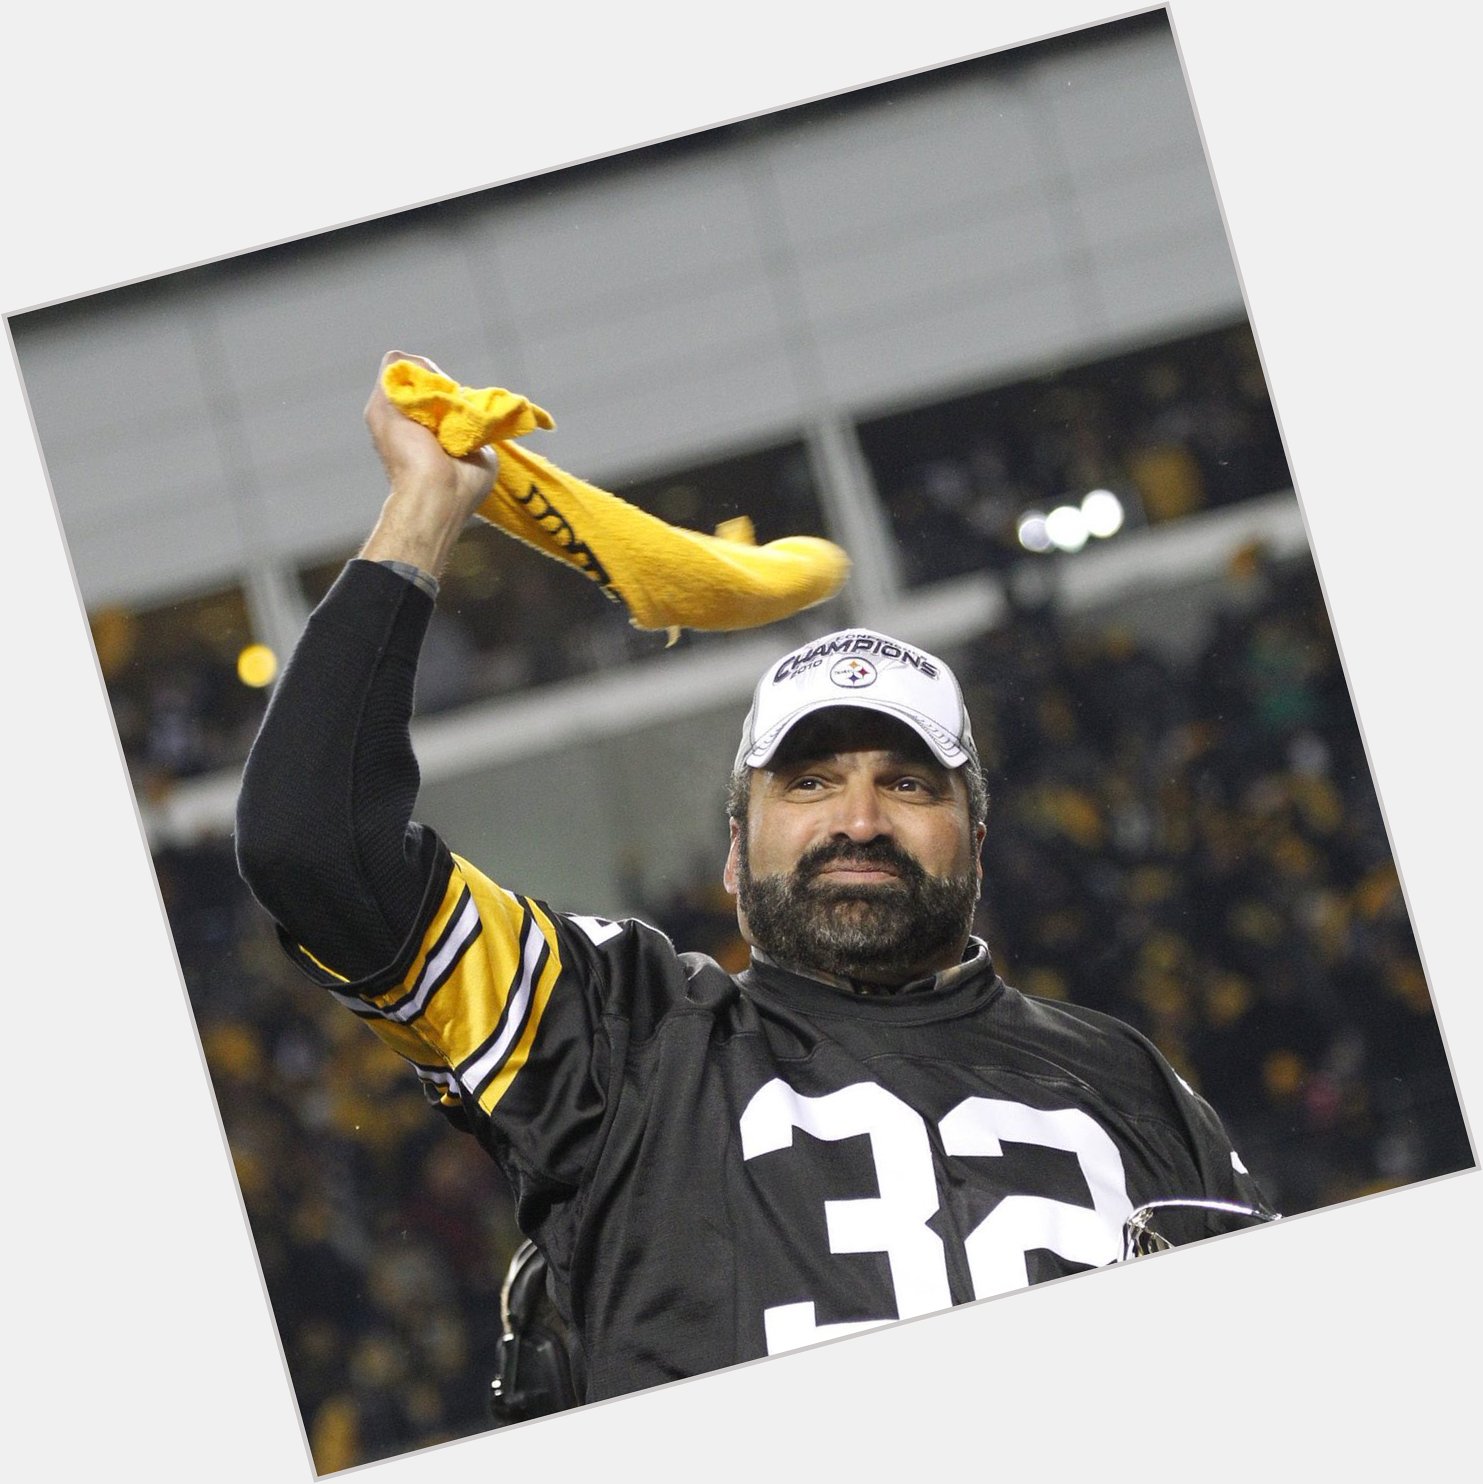 We would like to wish TSE Exclusive Athlete, Franco Harris a very happy birthday! 